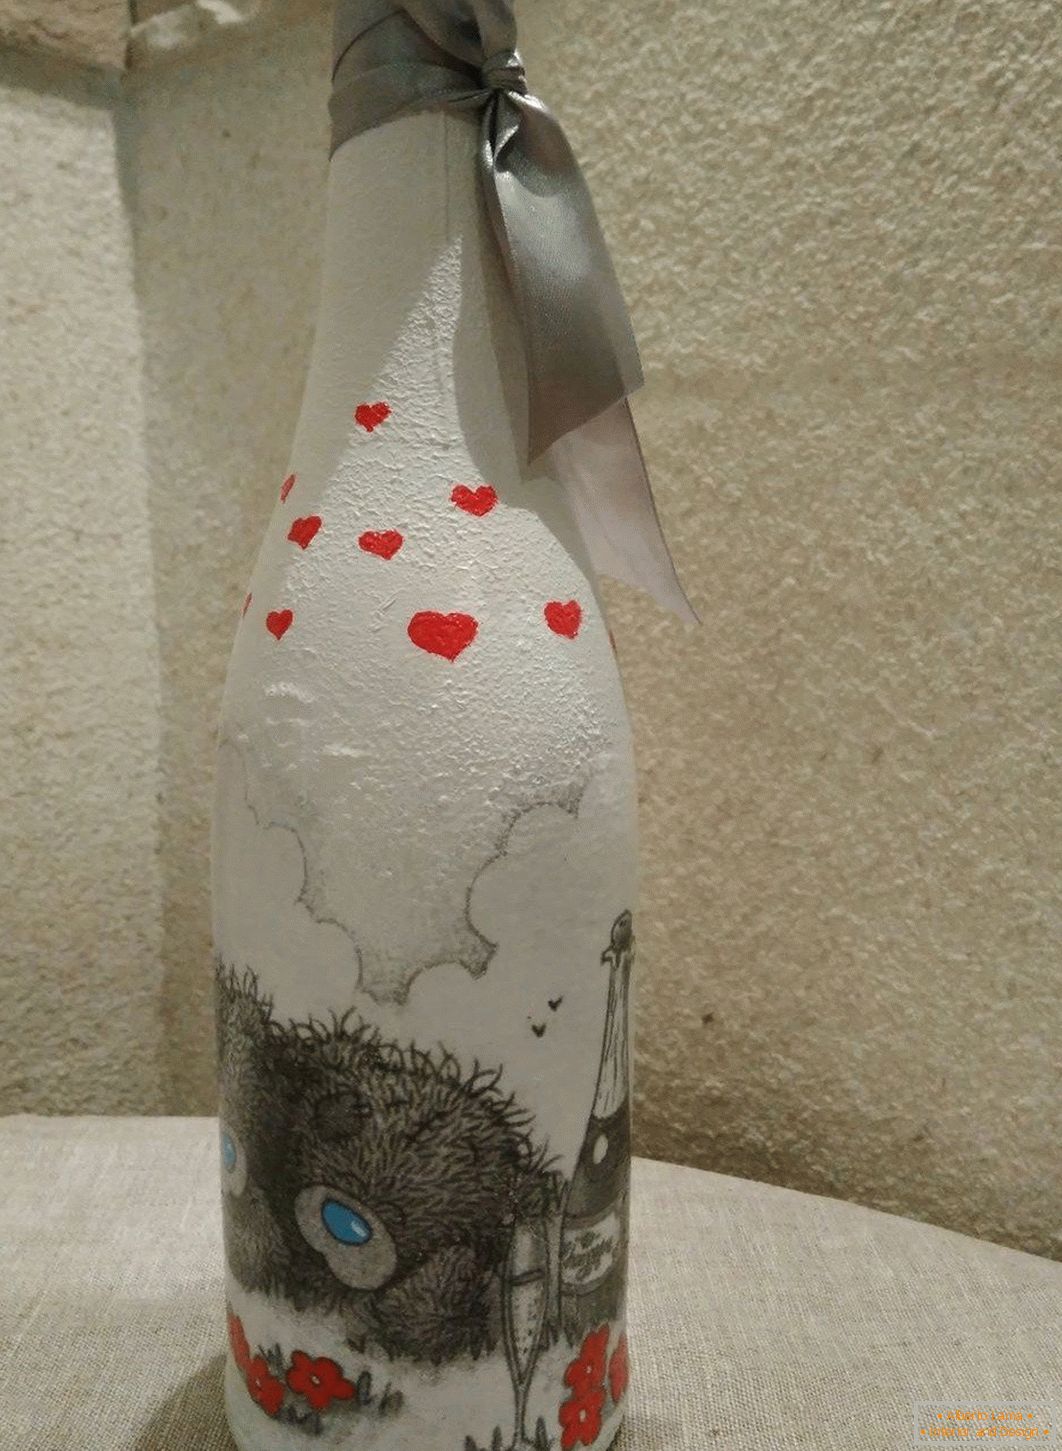 Drawing on the bottle